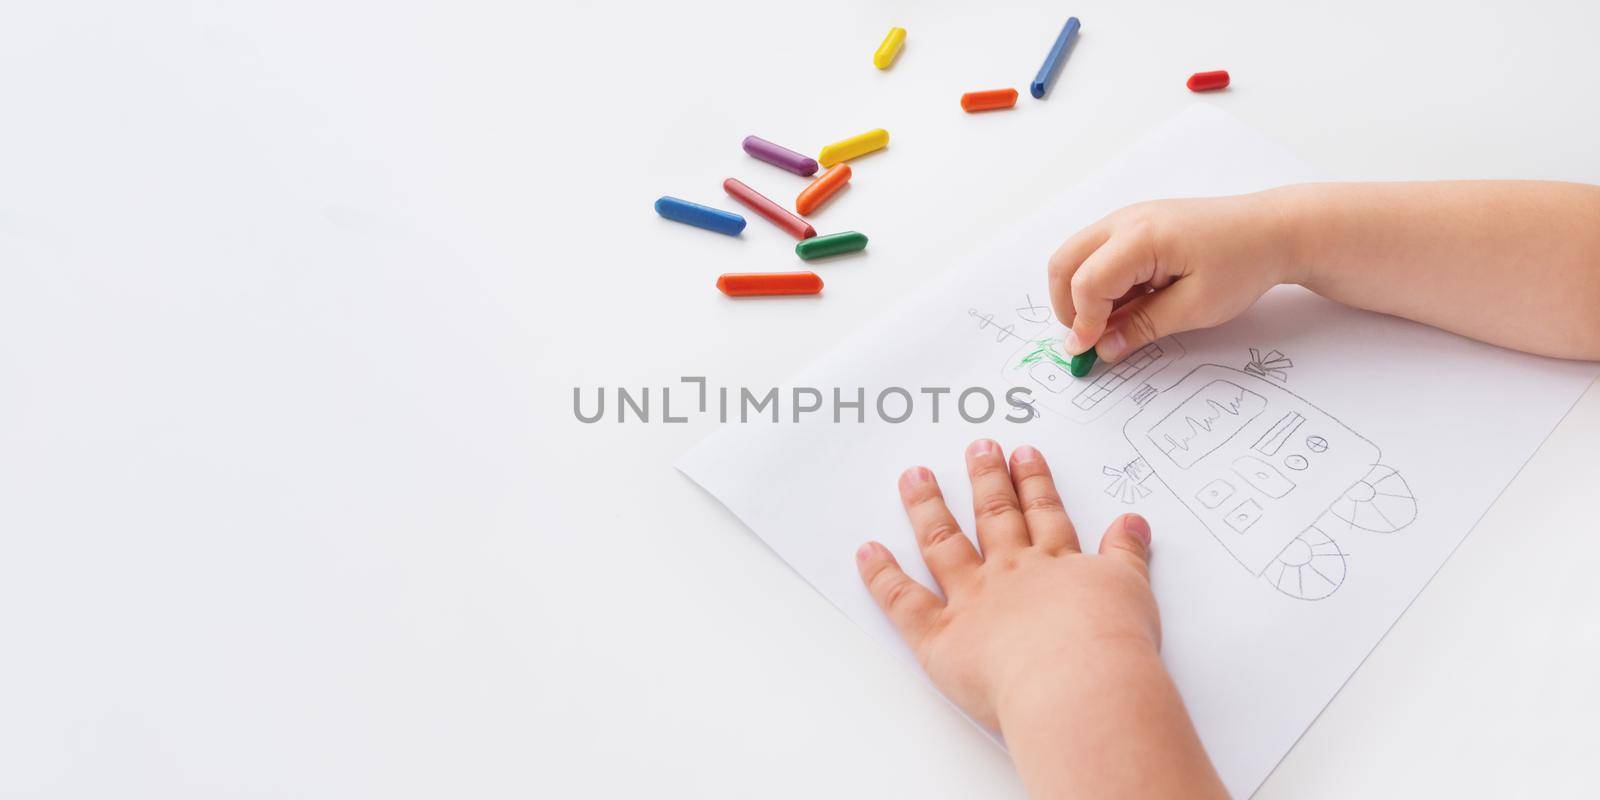 Toddler draws colorful robot. Kid uses wax crayons to paint it. Coloring pages to train fine motor skills on white background with copy space. by aksenovko